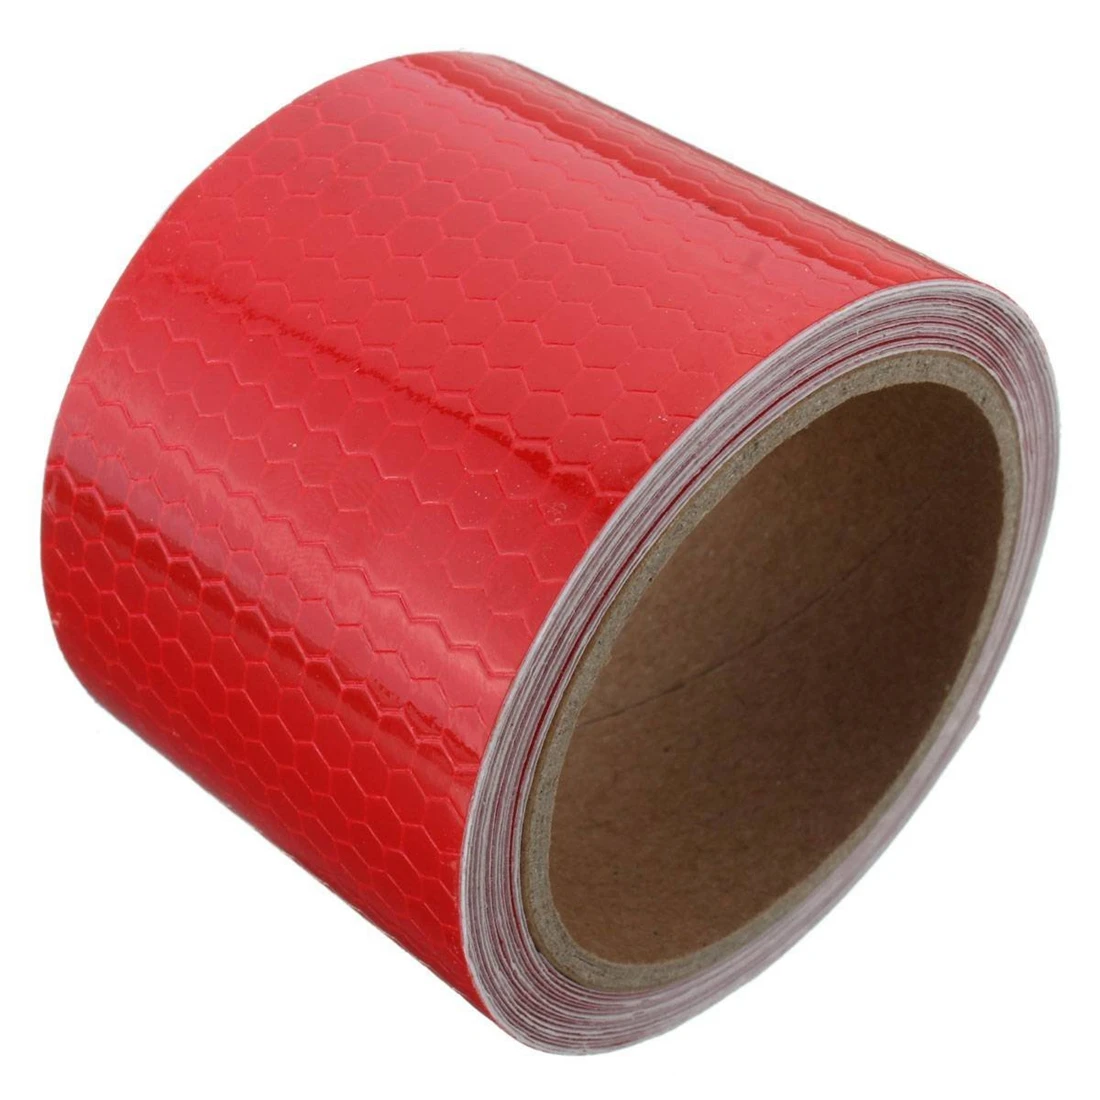 

5cm x 3m Tape Warning Tape Reflector Tape Security Tape, Red